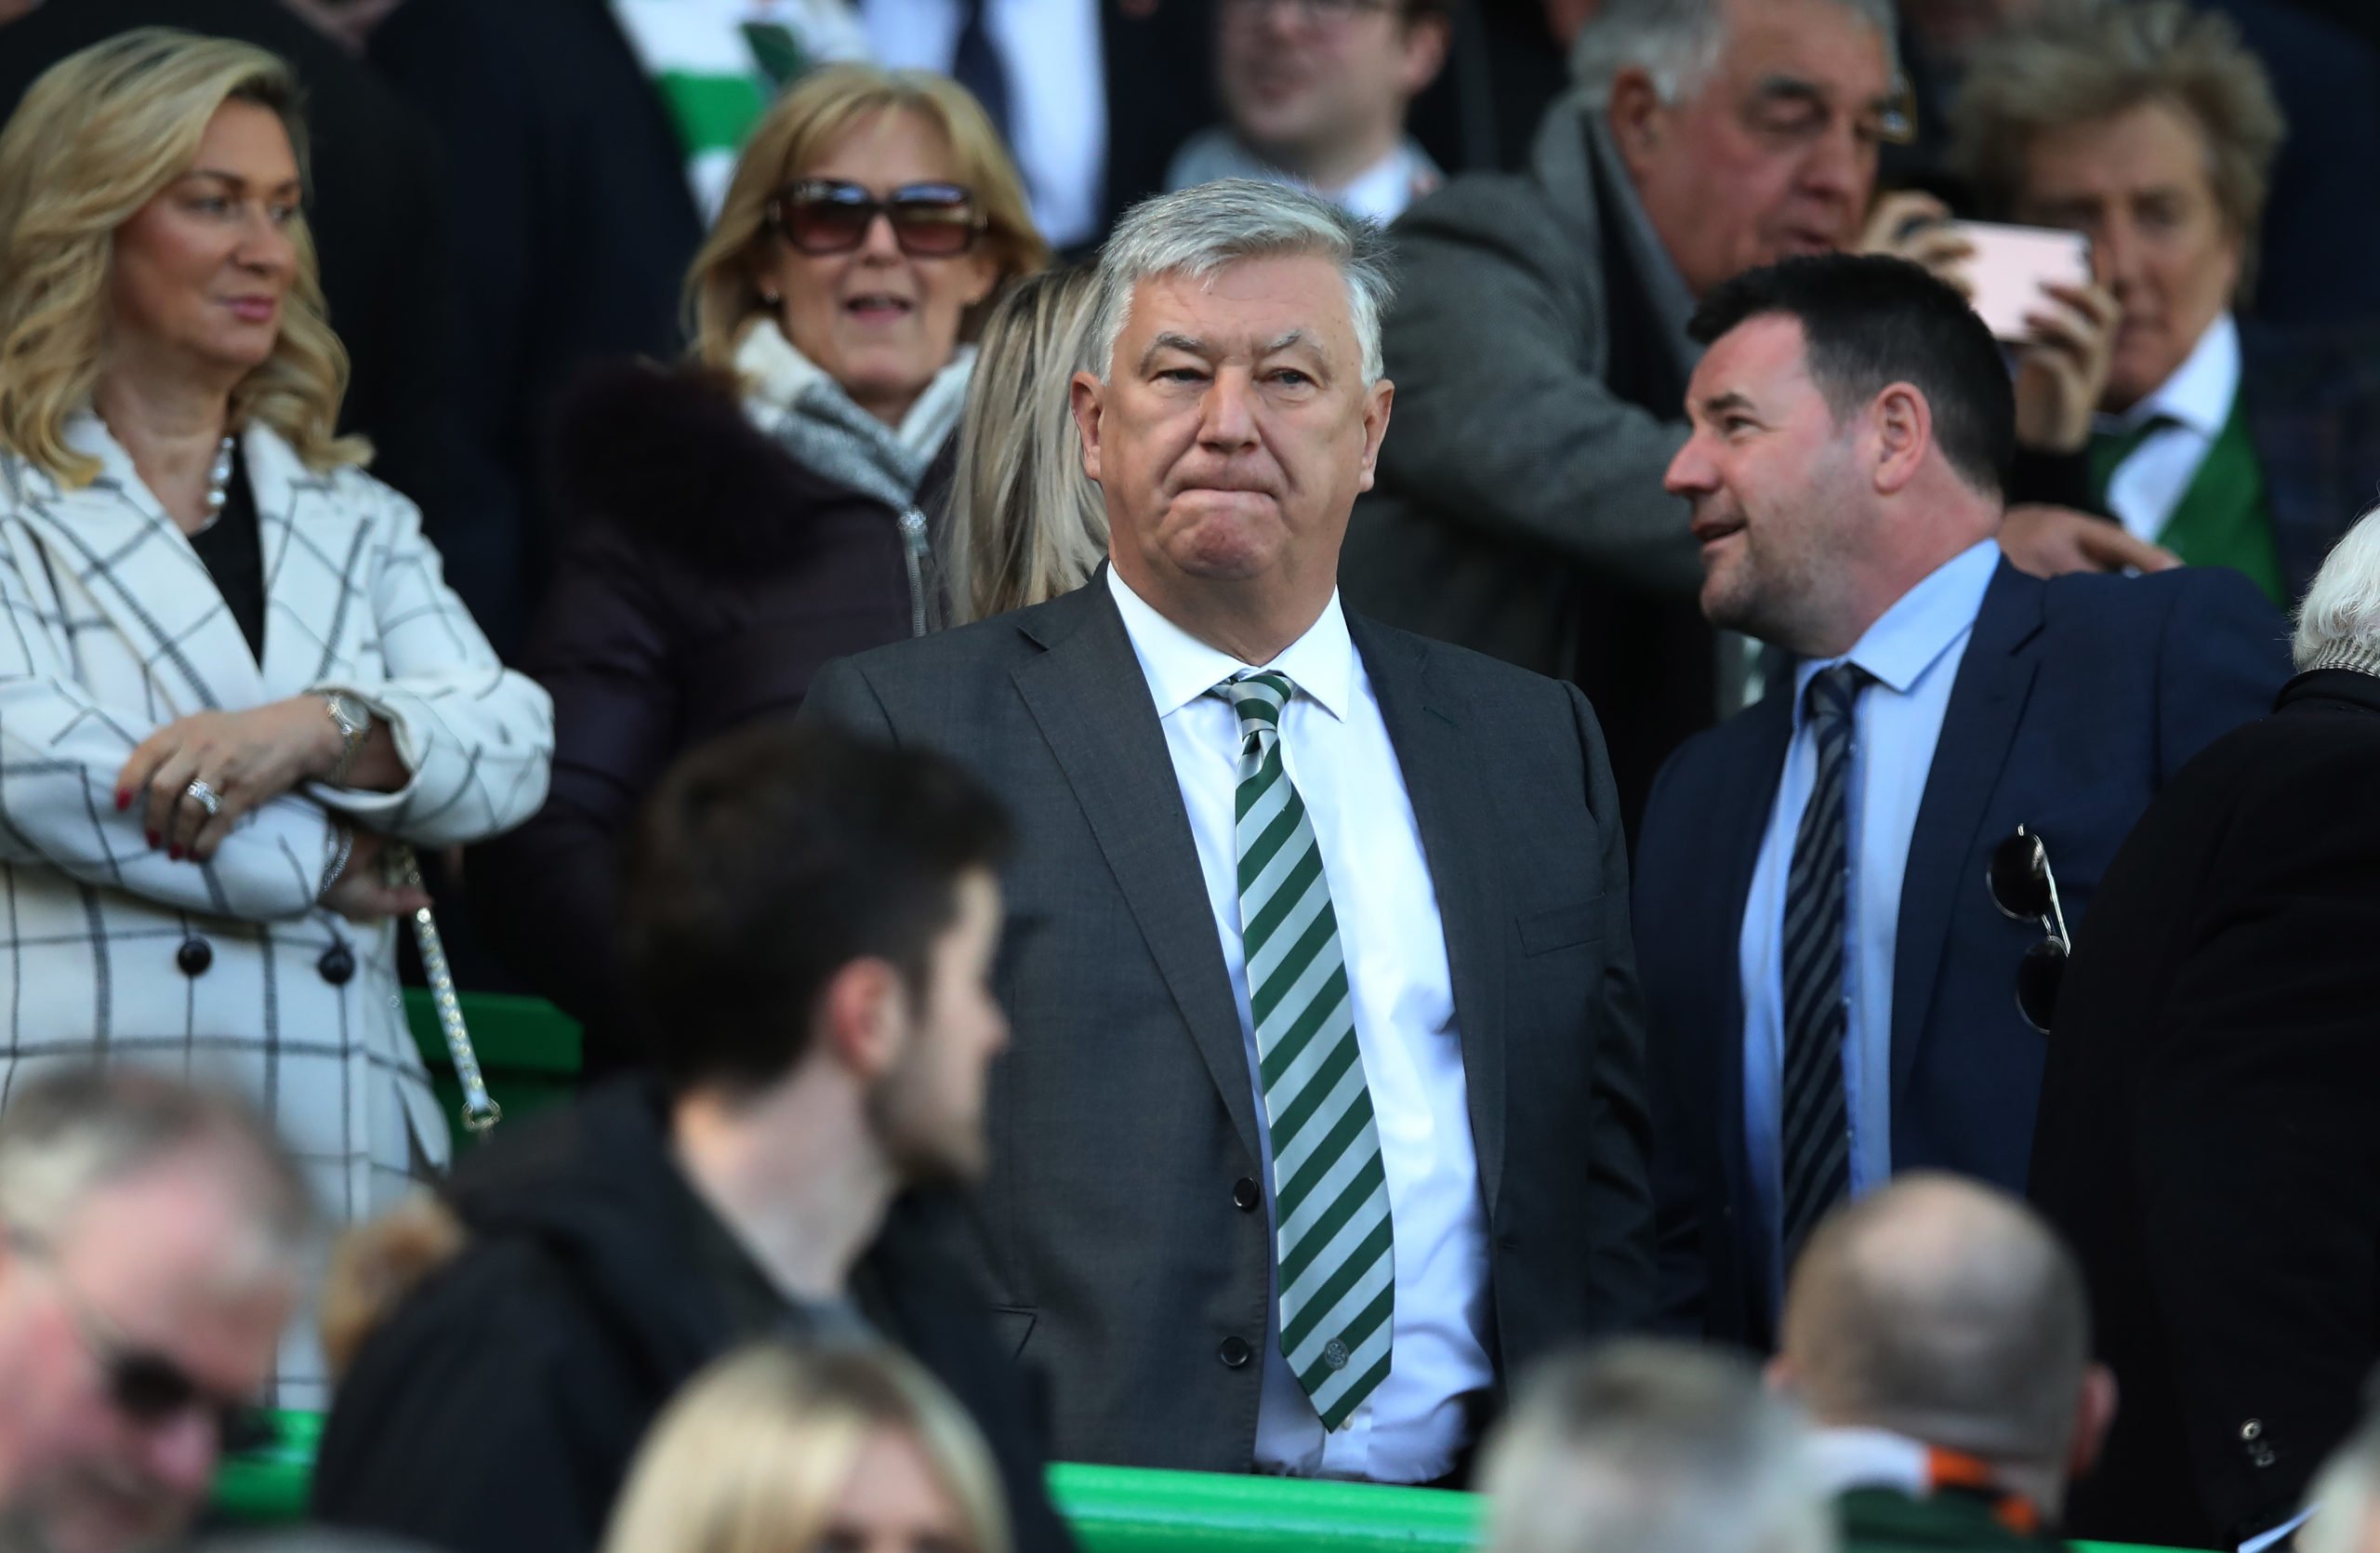 The damning Peter Lawwell quote from 2019 that kickstarted Celtic's regression